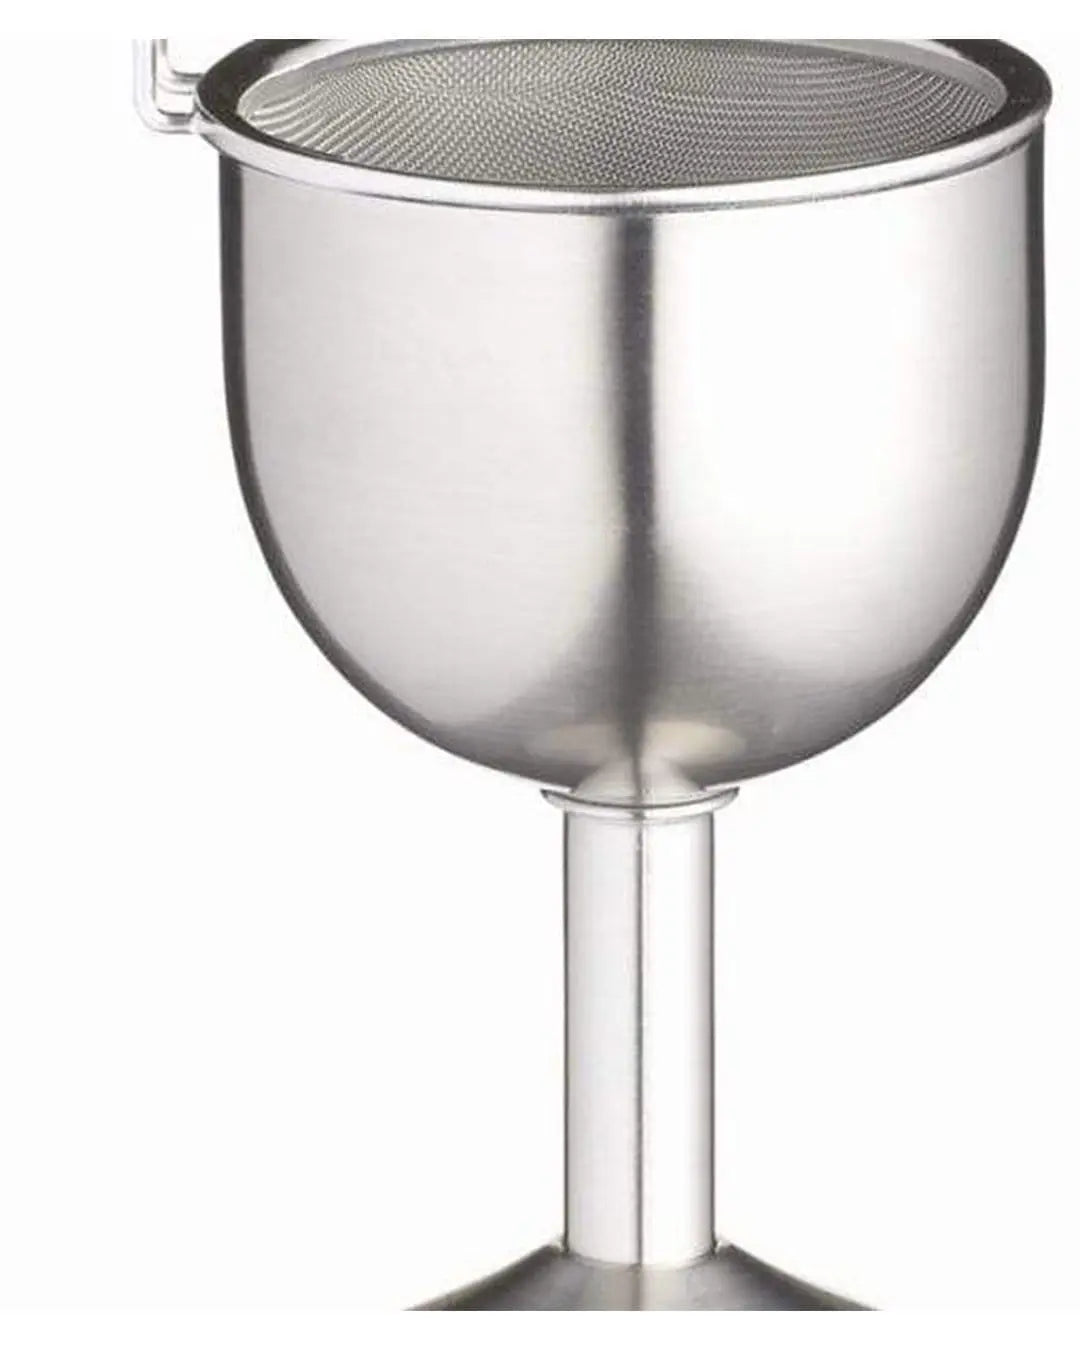 BarCraft Deluxe Wine Decanting Funnel Tableware